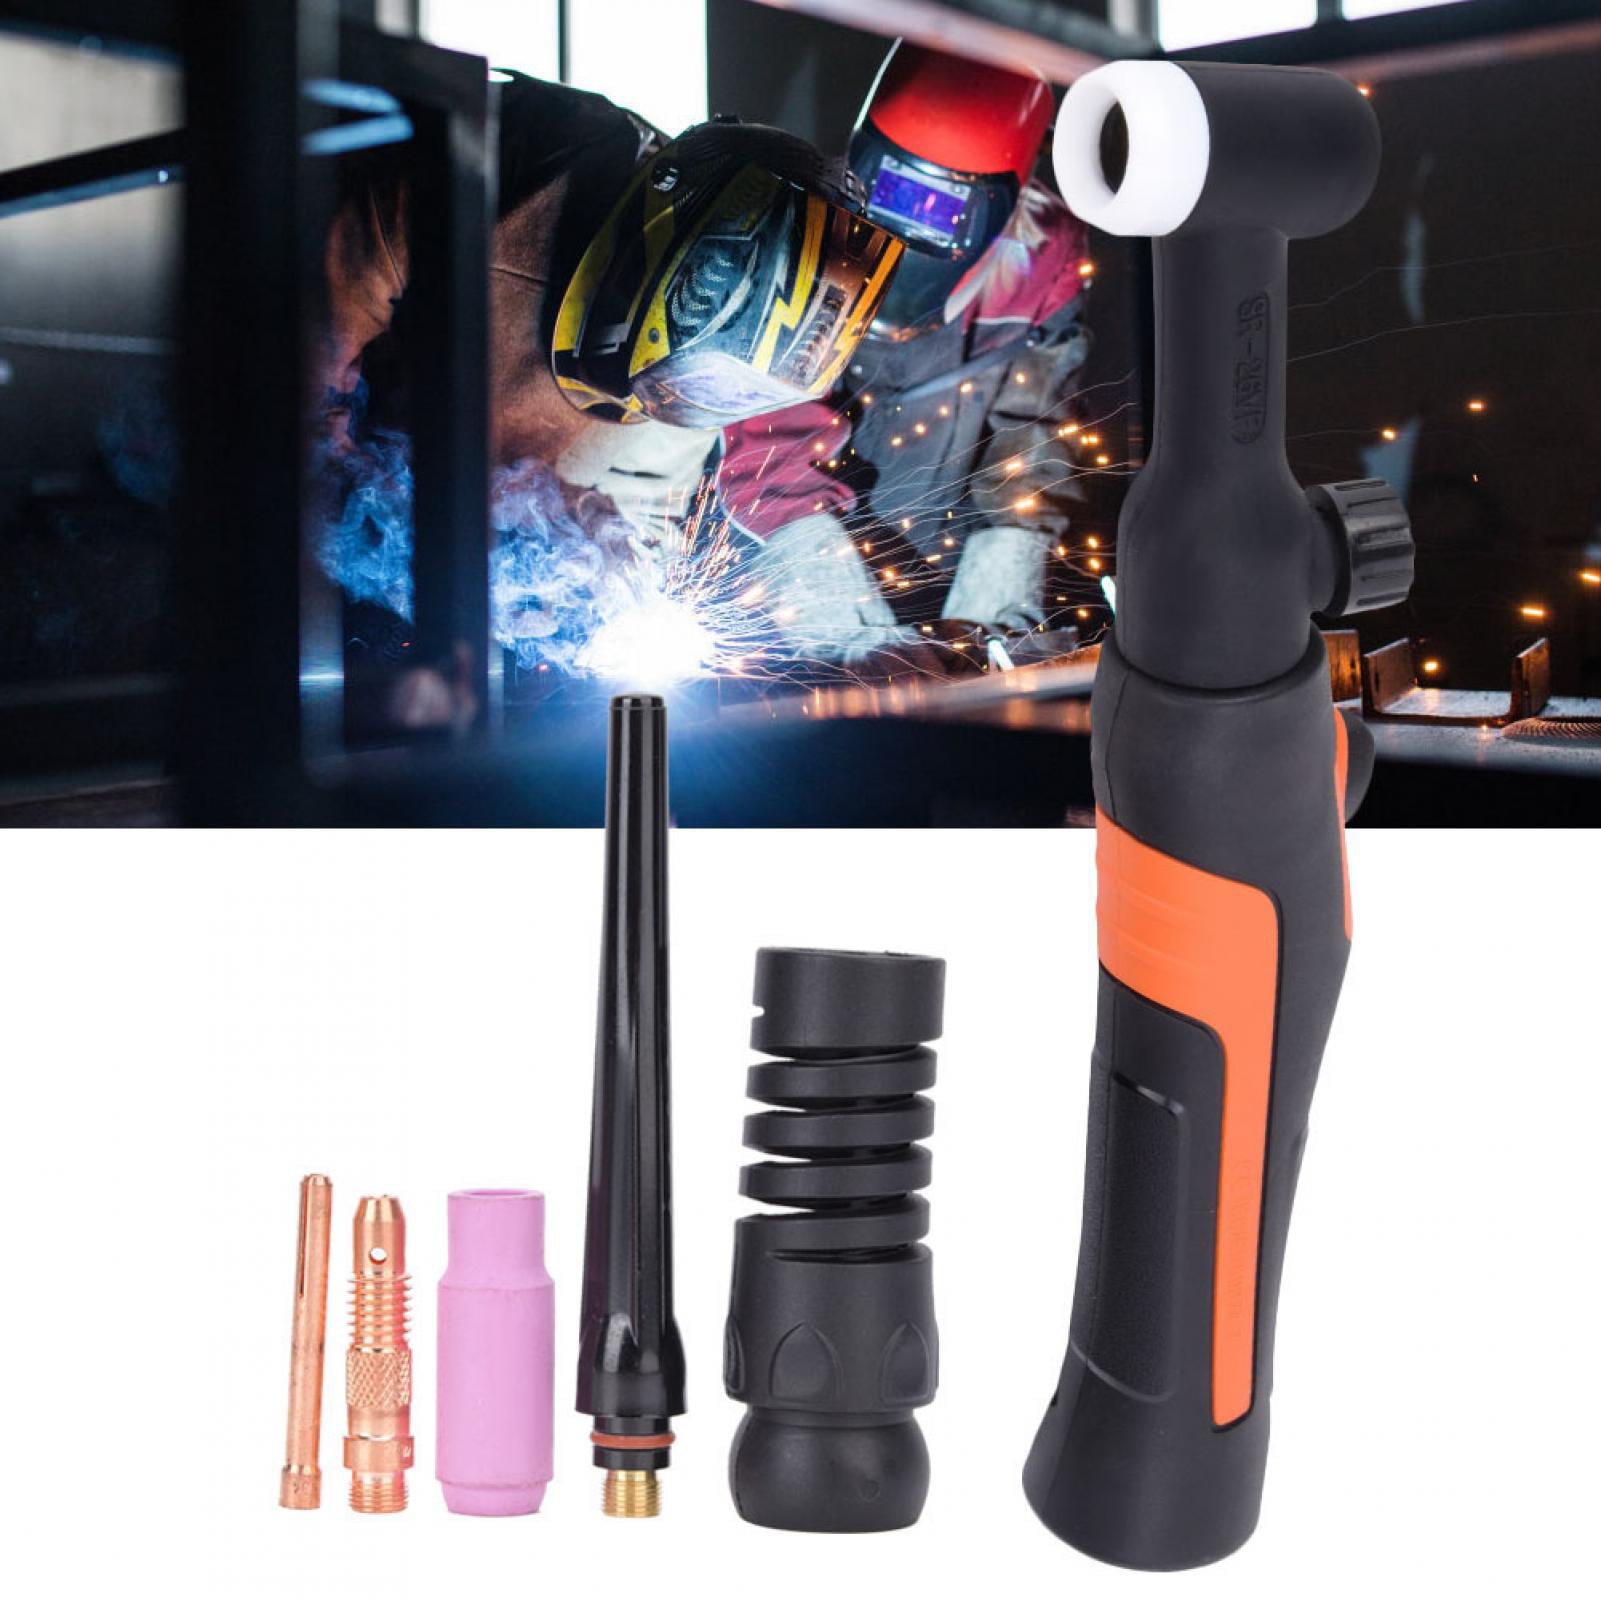 Welding Torch Handle-a Portable Welding Torch Handle That Can Be Controlled with One Hand and Is Comfortable To Hold TIG-26VF 